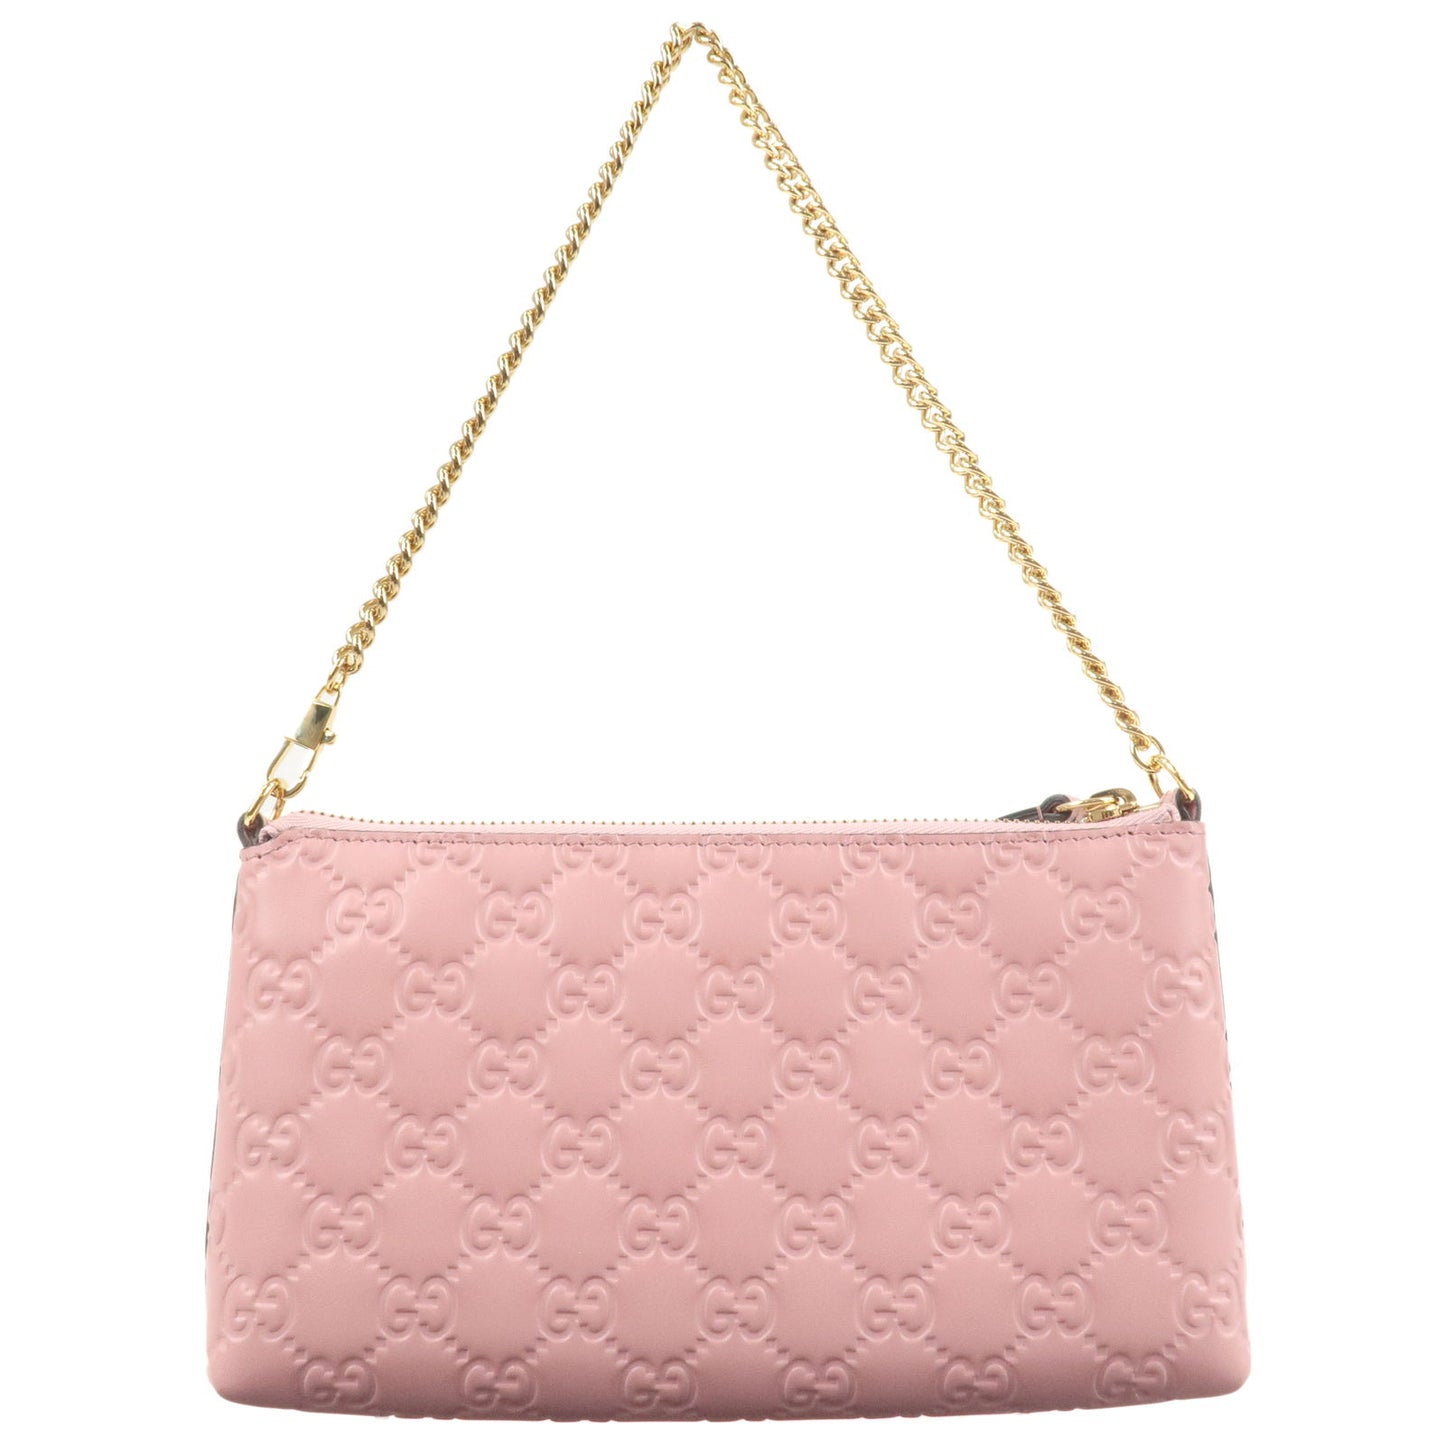 GUCCI Guccissima Leather Wristlet Chain Wallet Pink 428449